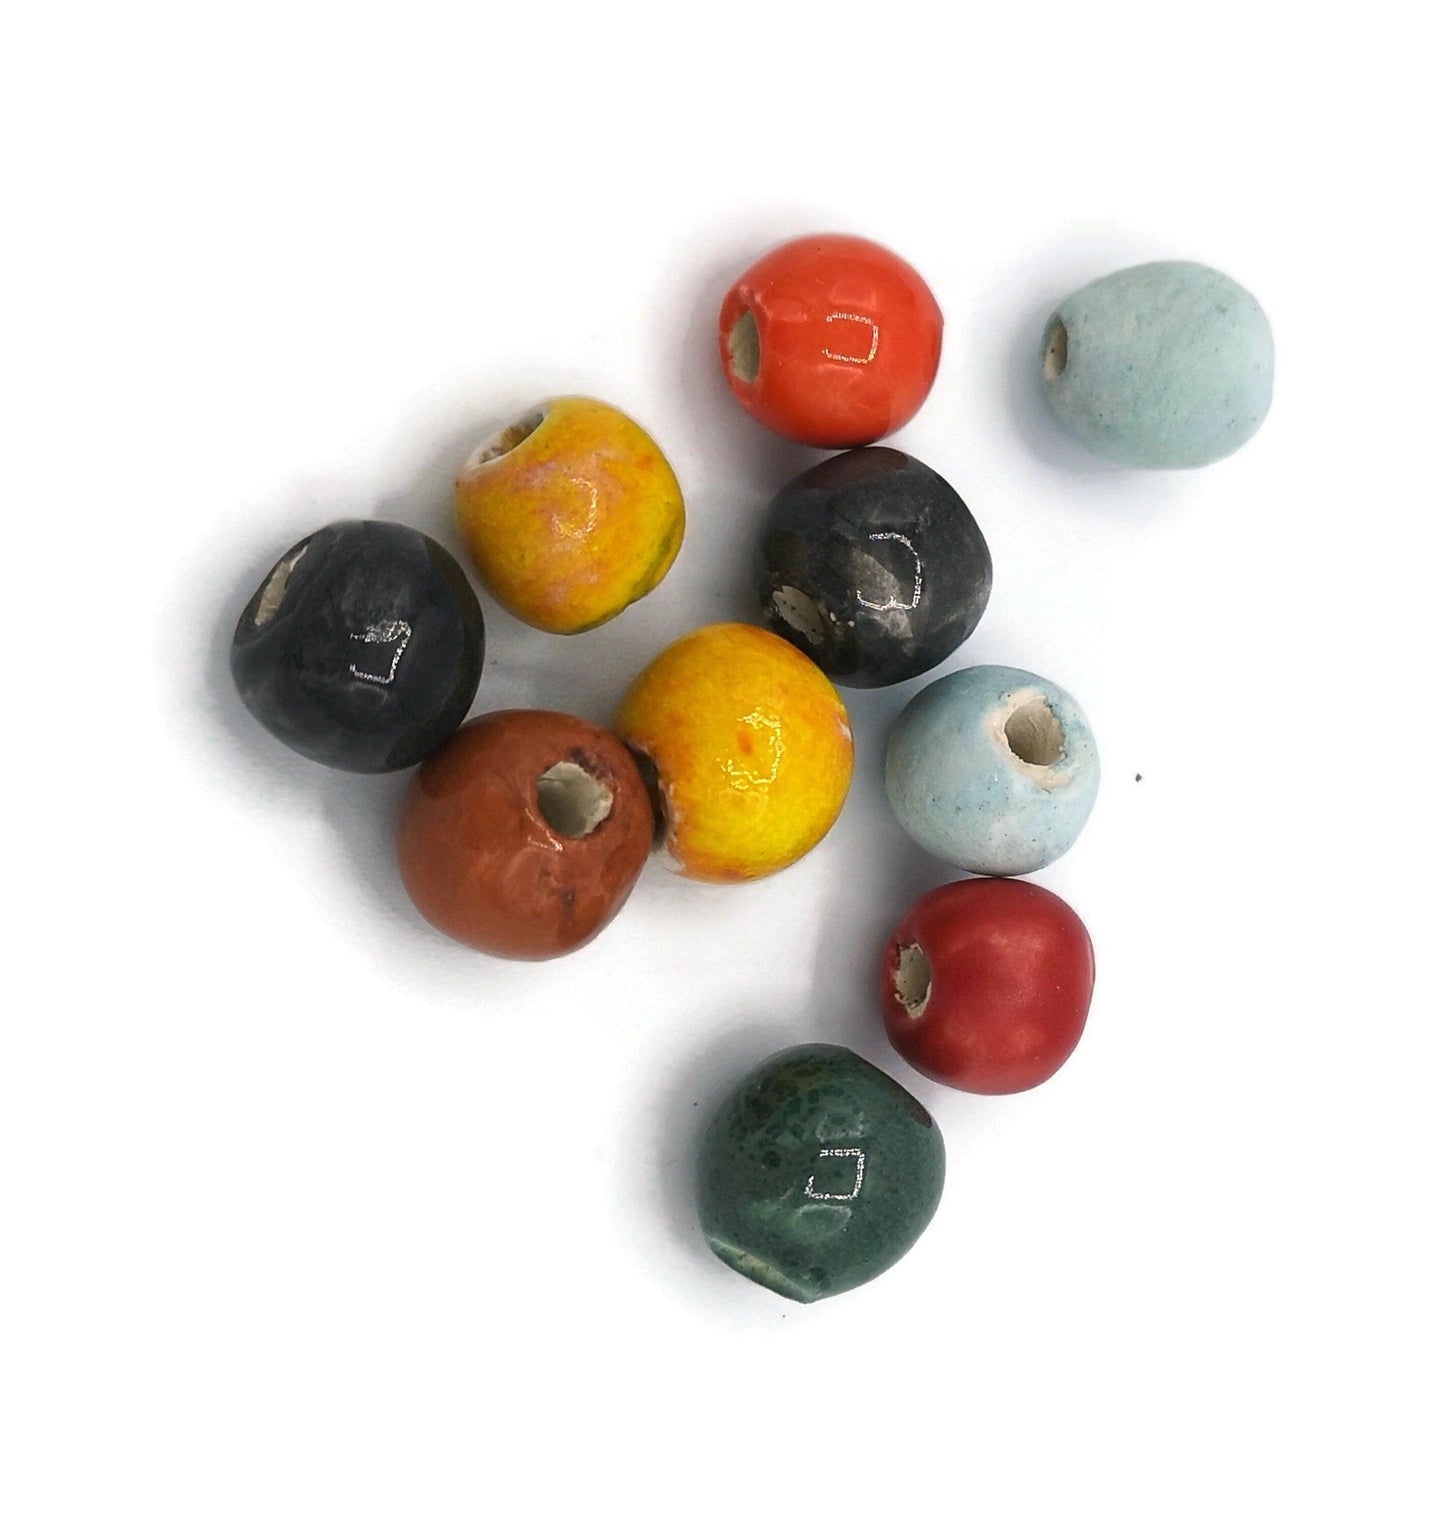 10Pc Round Assorted Beads Set, Handmade Ceramic Beads For Jewelry Making, Unique Artisan Clay Beads For Macrame Smooth And Durable Supplies - Ceramica Ana Rafael